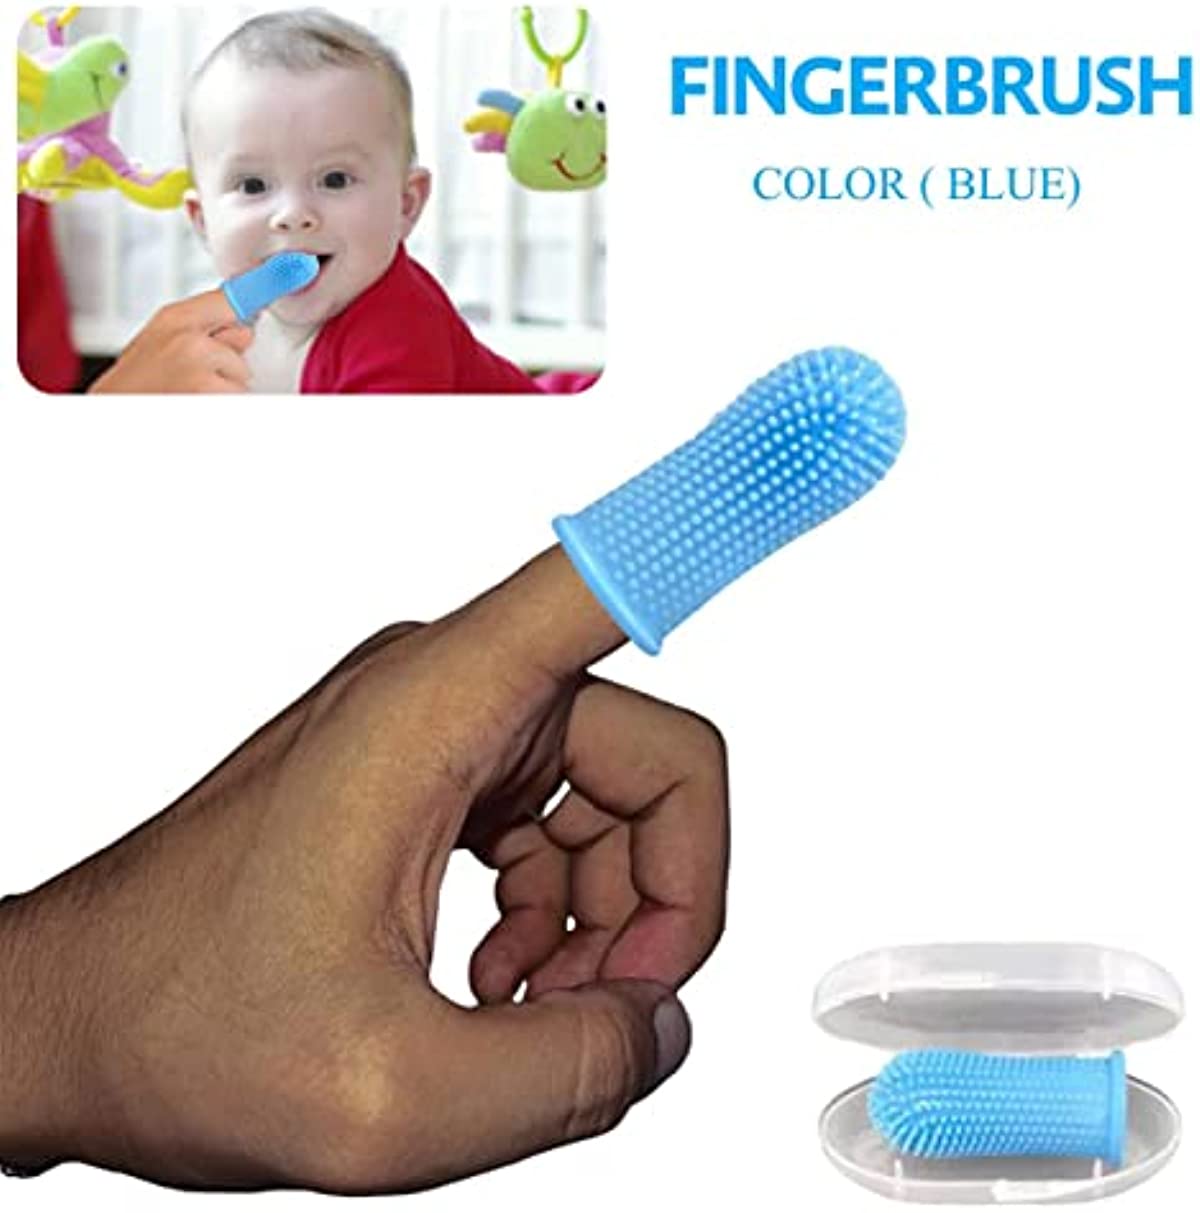 Silicone Baby Finger Toothbrush with 360° Bristles, Toddler Toothbrush Age 1-2, 100{6f0234061ce864f4be6eb94402f0ec8b7bd6ca8016a987b3012c939597c552ee} BPA Free for Babies and Toddlers, 360 Degree Design Infant Toothbrush for Teeth and Gums (1 Pack)